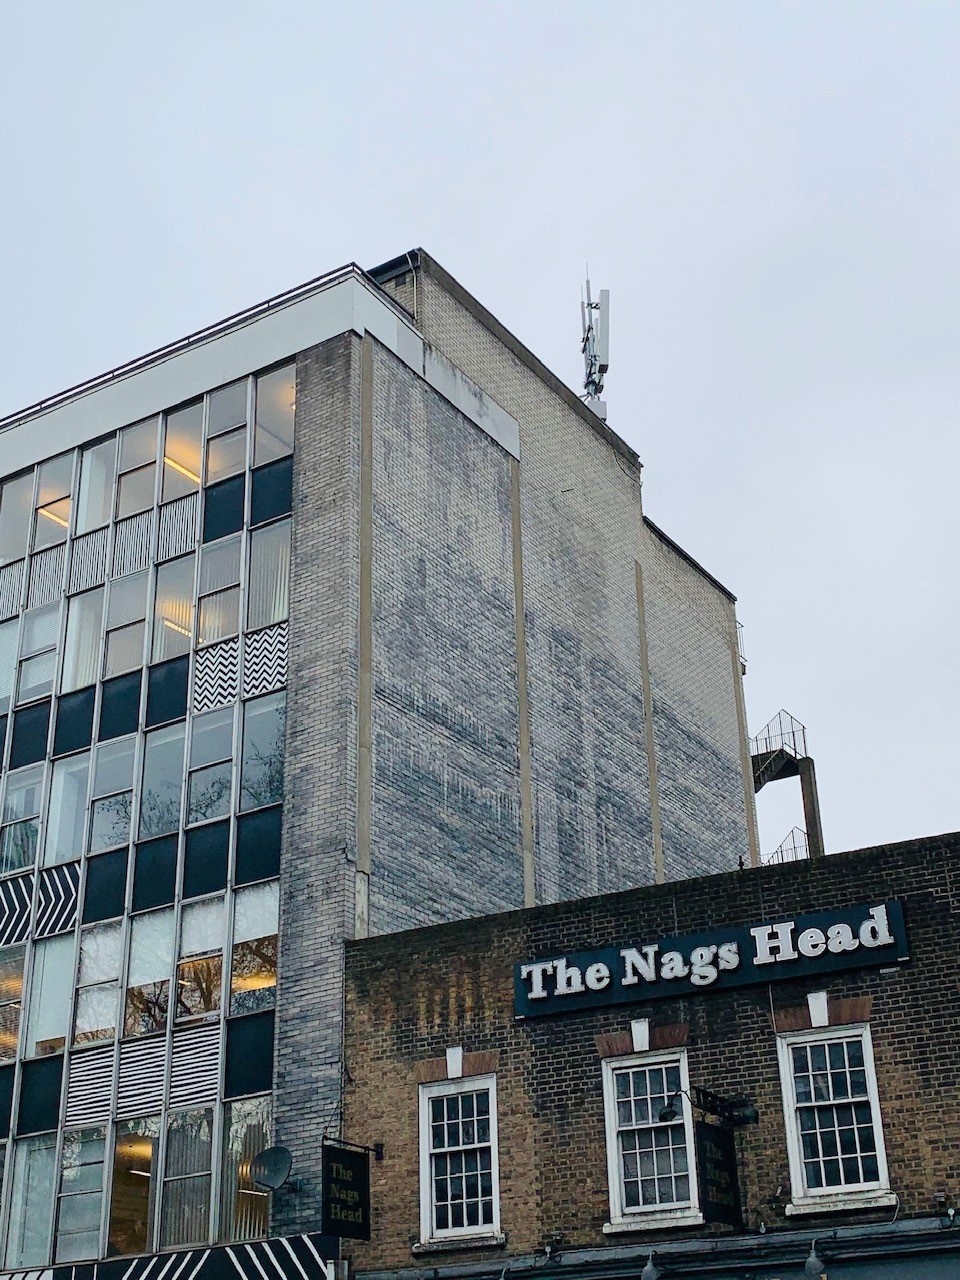 side view of the e-1 studies building with The Nags Head signage